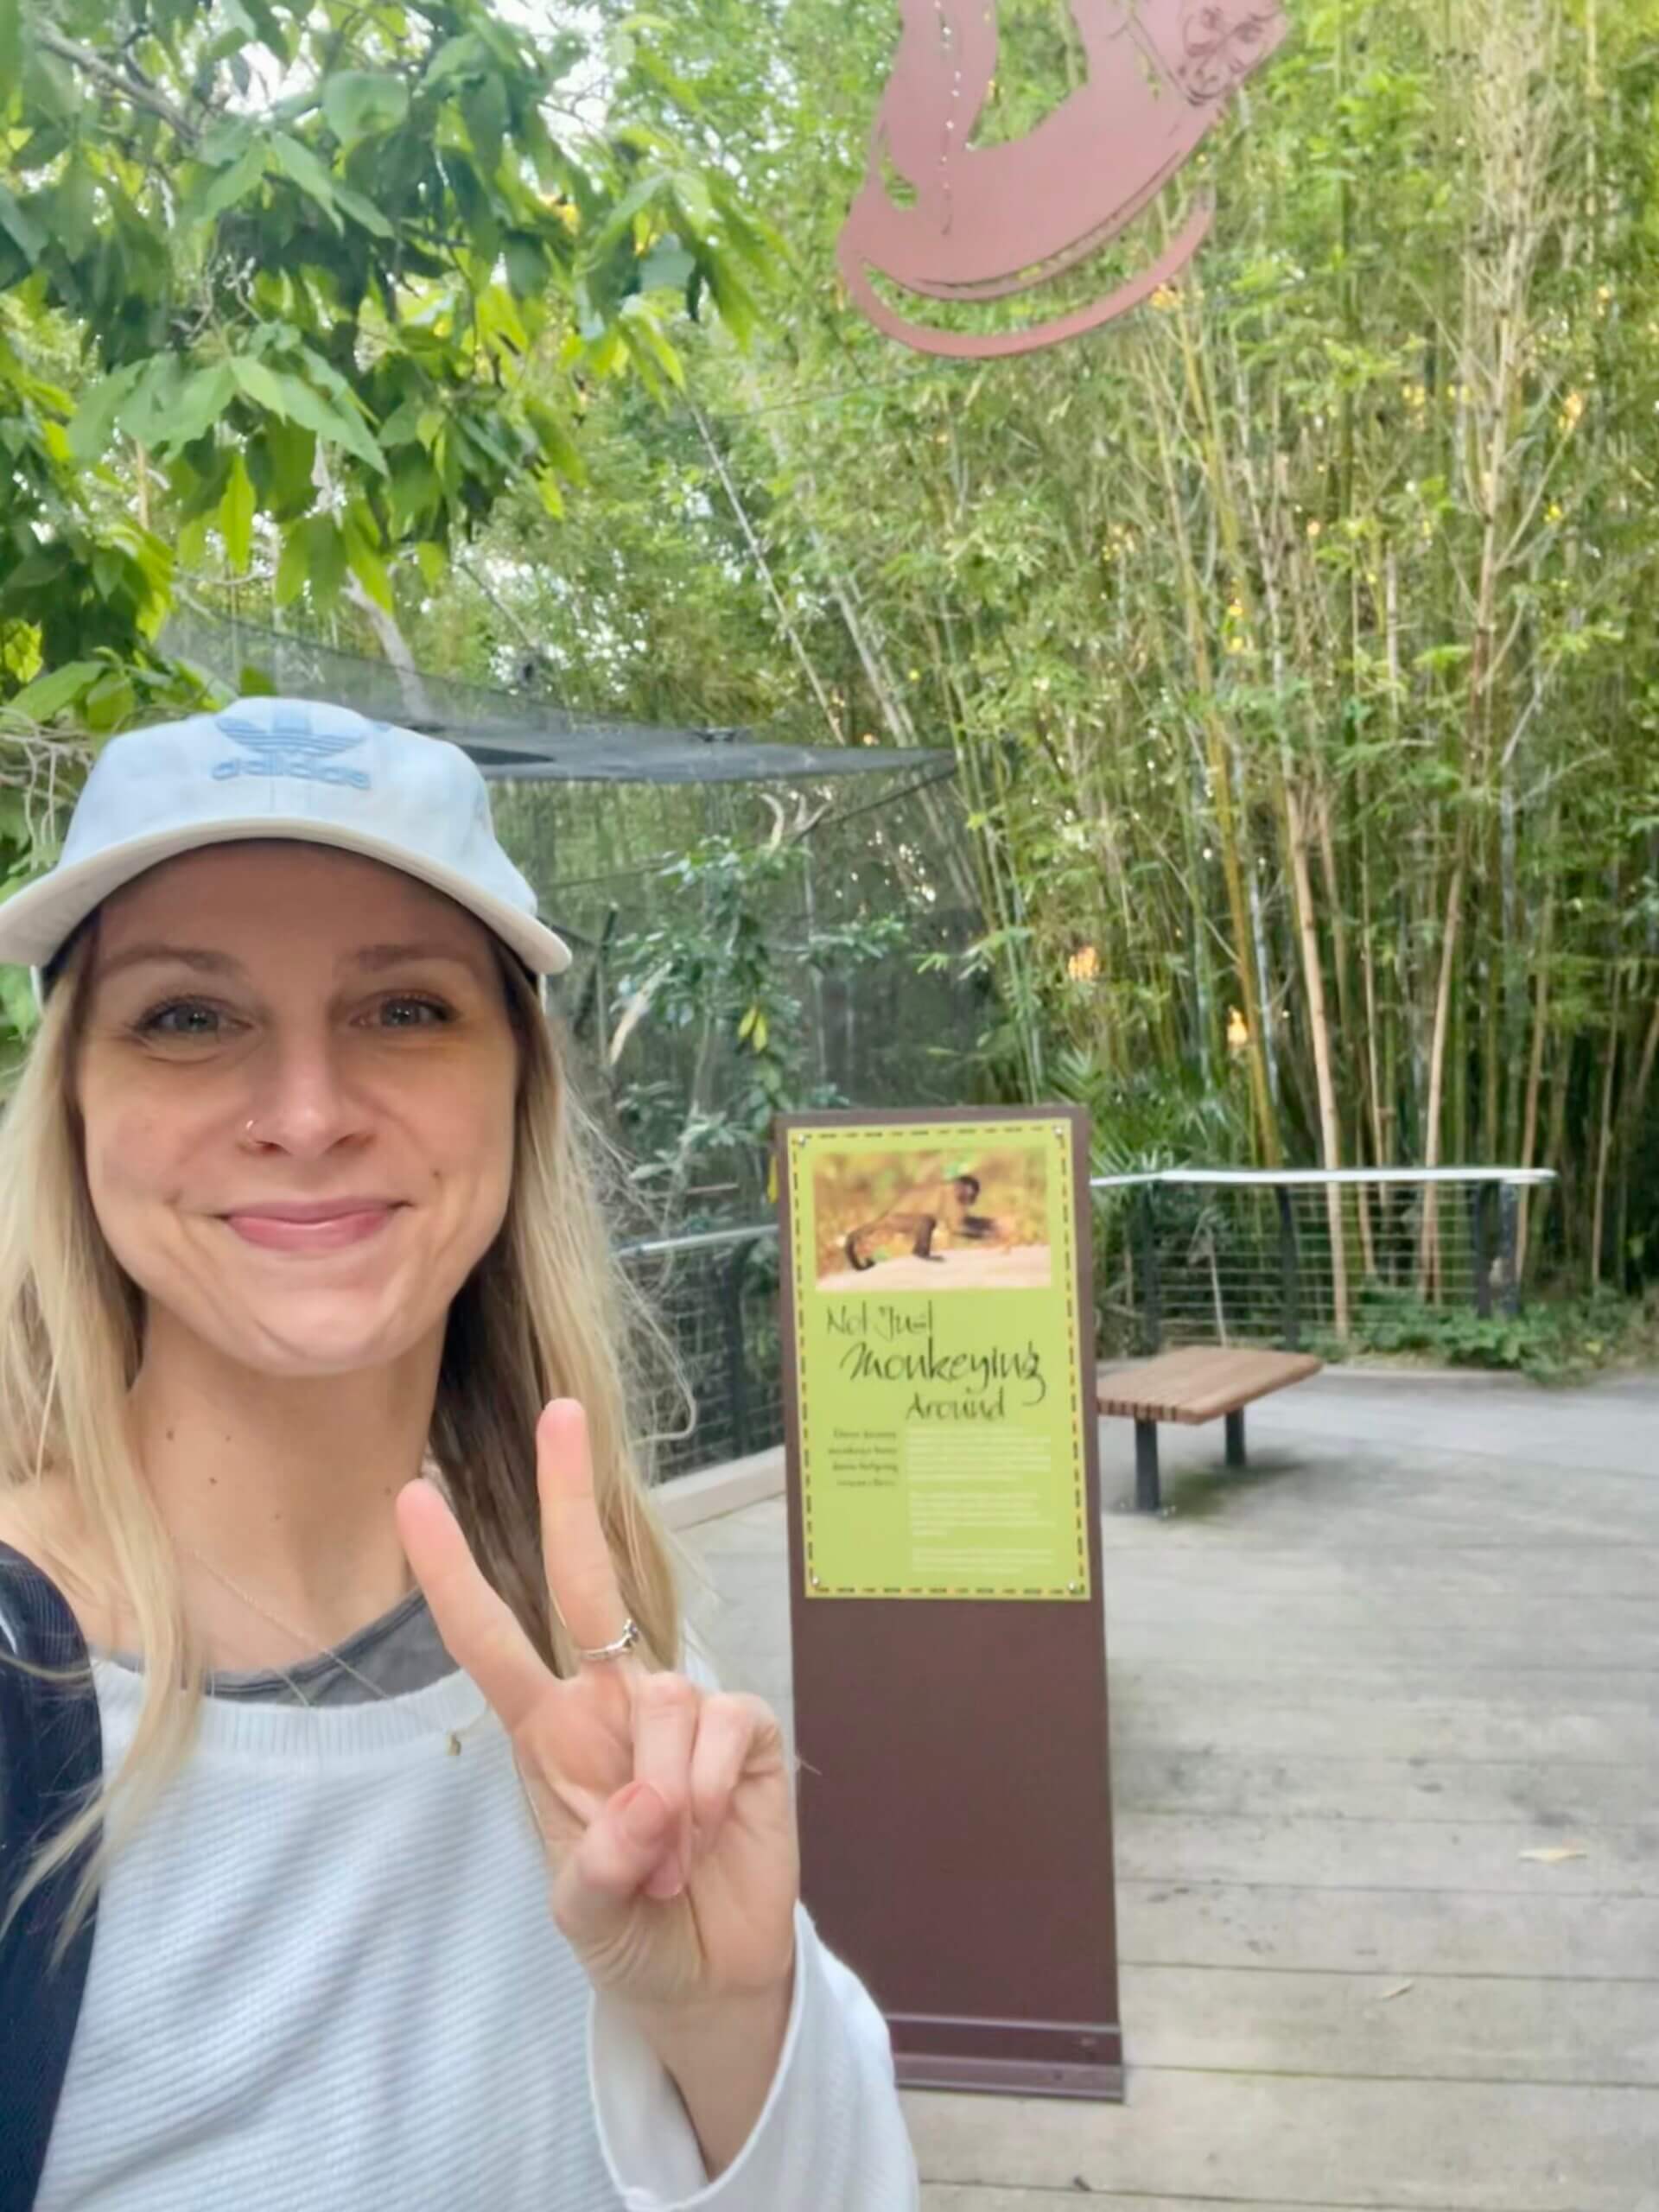 Toni at the San Diego Zoo, Things to do in San Diego, layover in San Diego, what flight attendants do on layovers, mixed feelings on zoos, are zoos ethical?, are zoos as bad as seaworld?